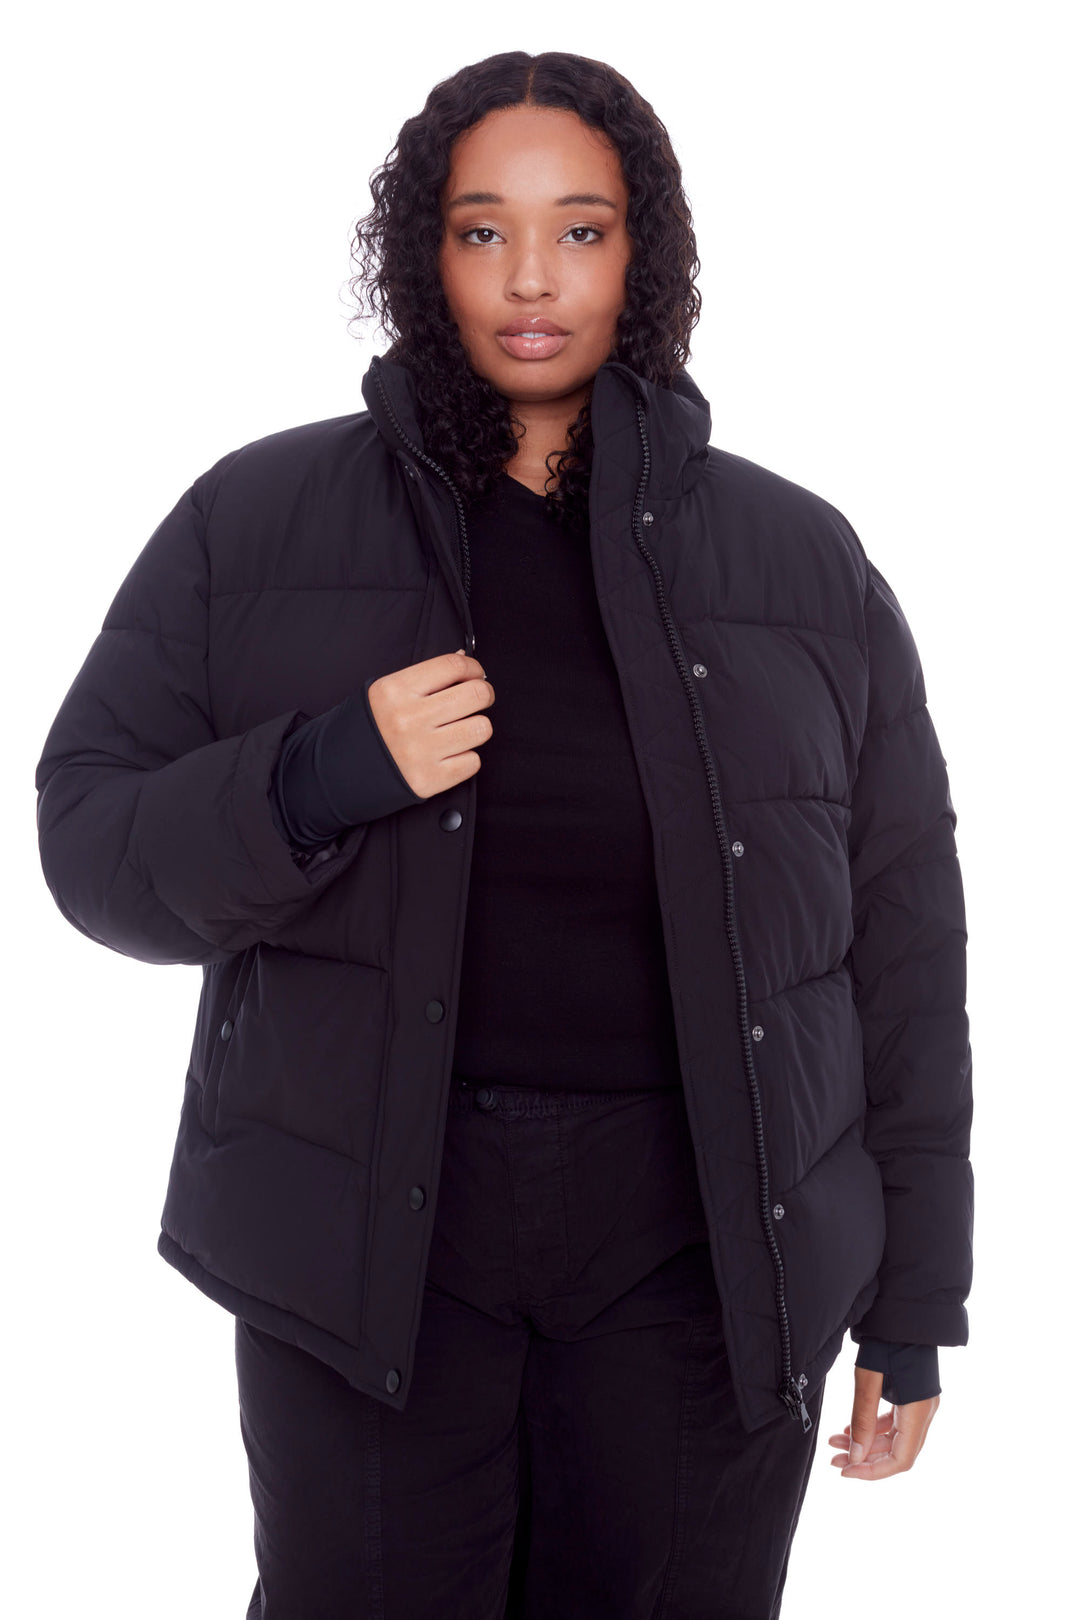 Plus Size Winter Coats for Women 2024 Warm Sherpa Fleece Lined Distressed  Jackets Hooded Parka Faux Suede Pea Coat Outerwear, womens winter coats  clearance plus size pea coat, Army Green S at